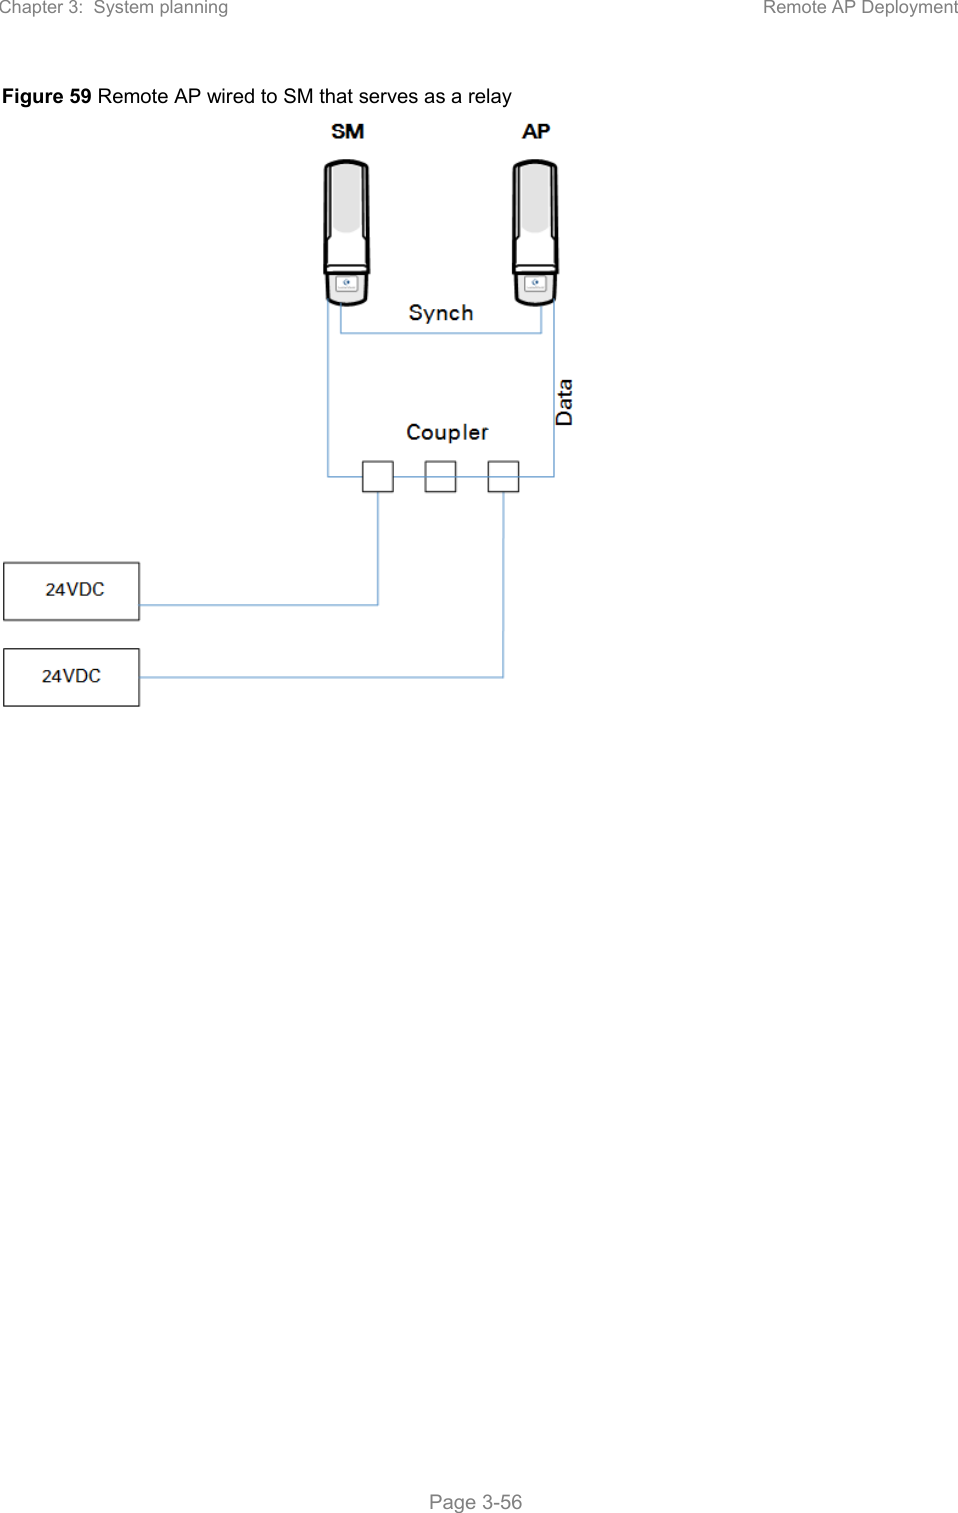 Chapter 3:  System planning  Remote AP Deployment   Page 3-56 Figure 59 Remote AP wired to SM that serves as a relay    